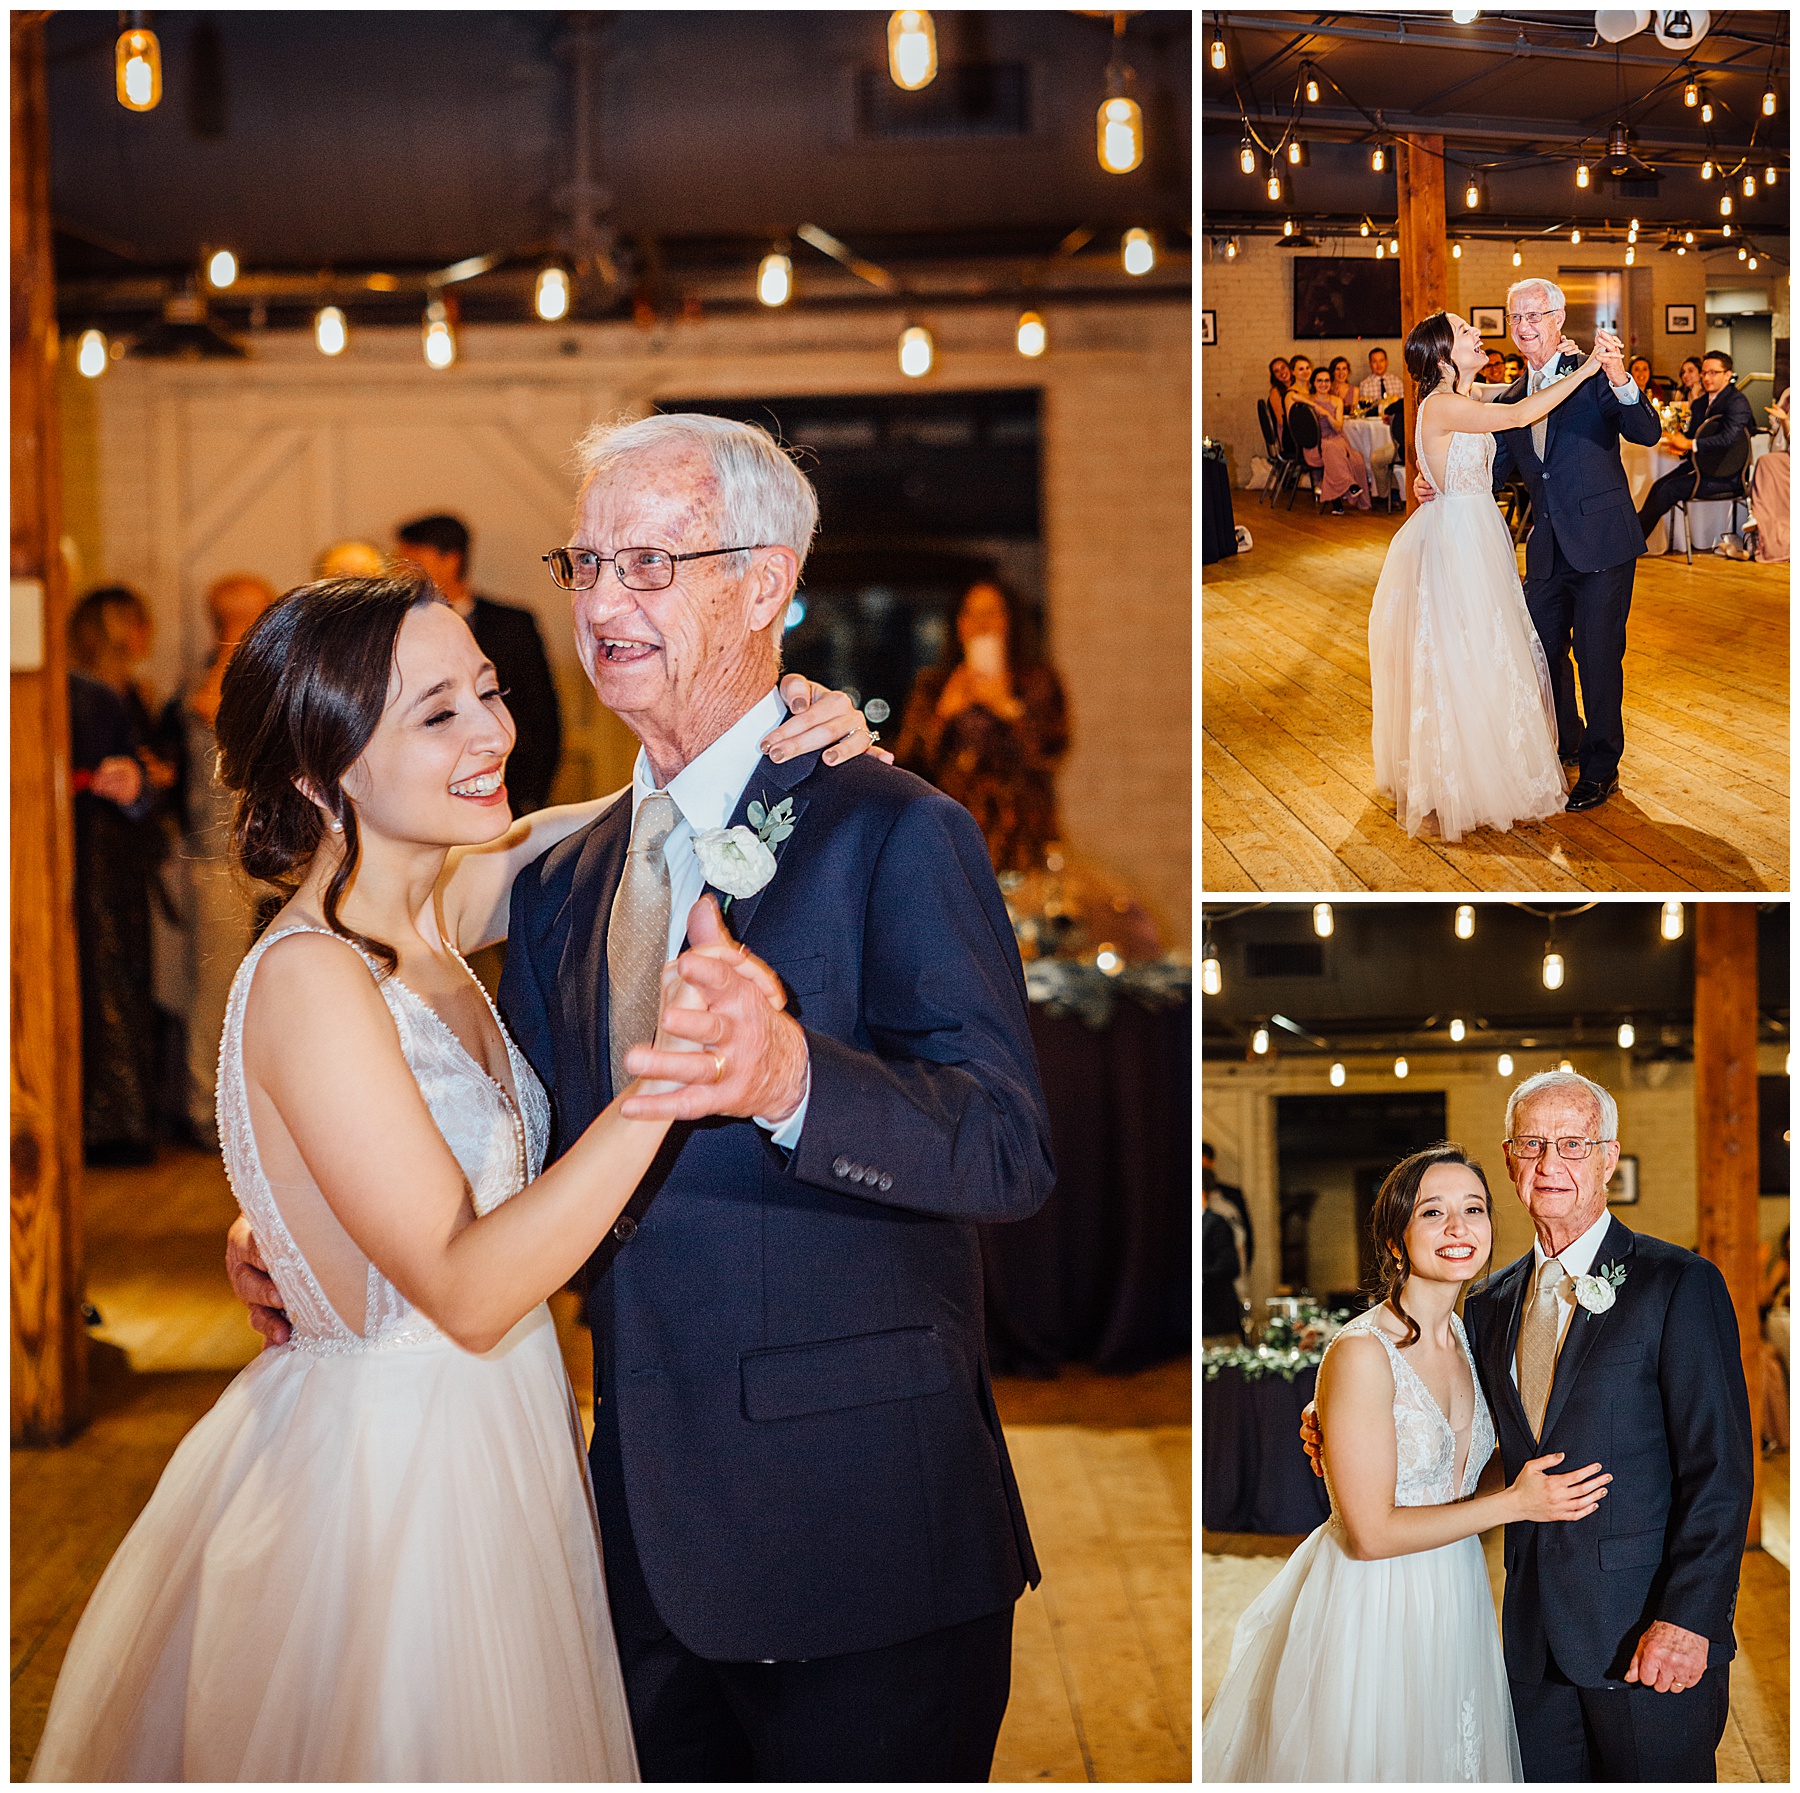 Father, daughter dance at Old Mattress factory reception